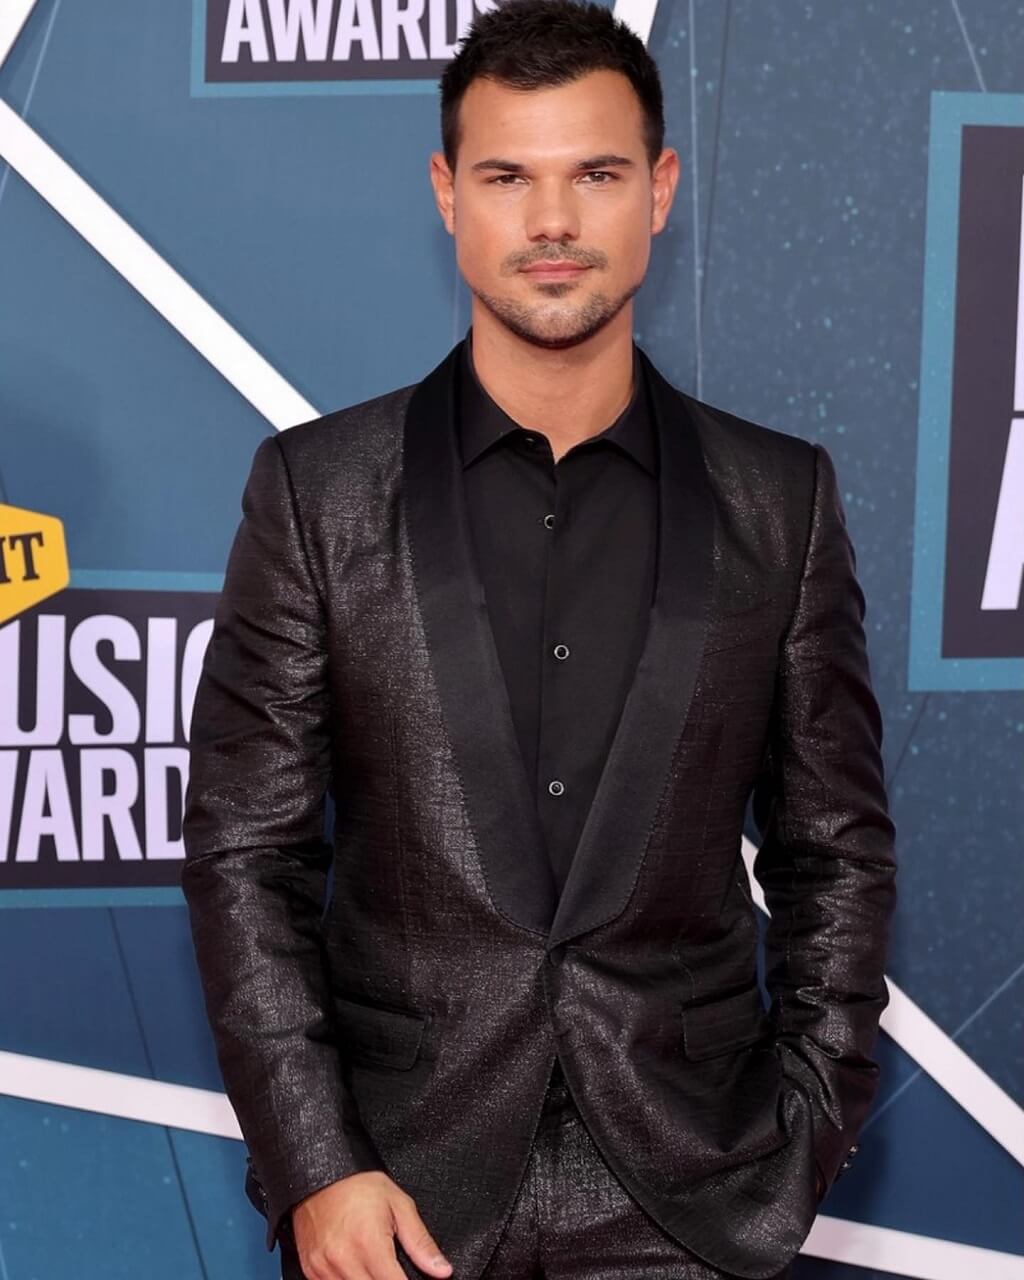 Taylor Lautner Biography, Wiki, Age, Wife, Net Worth, Family